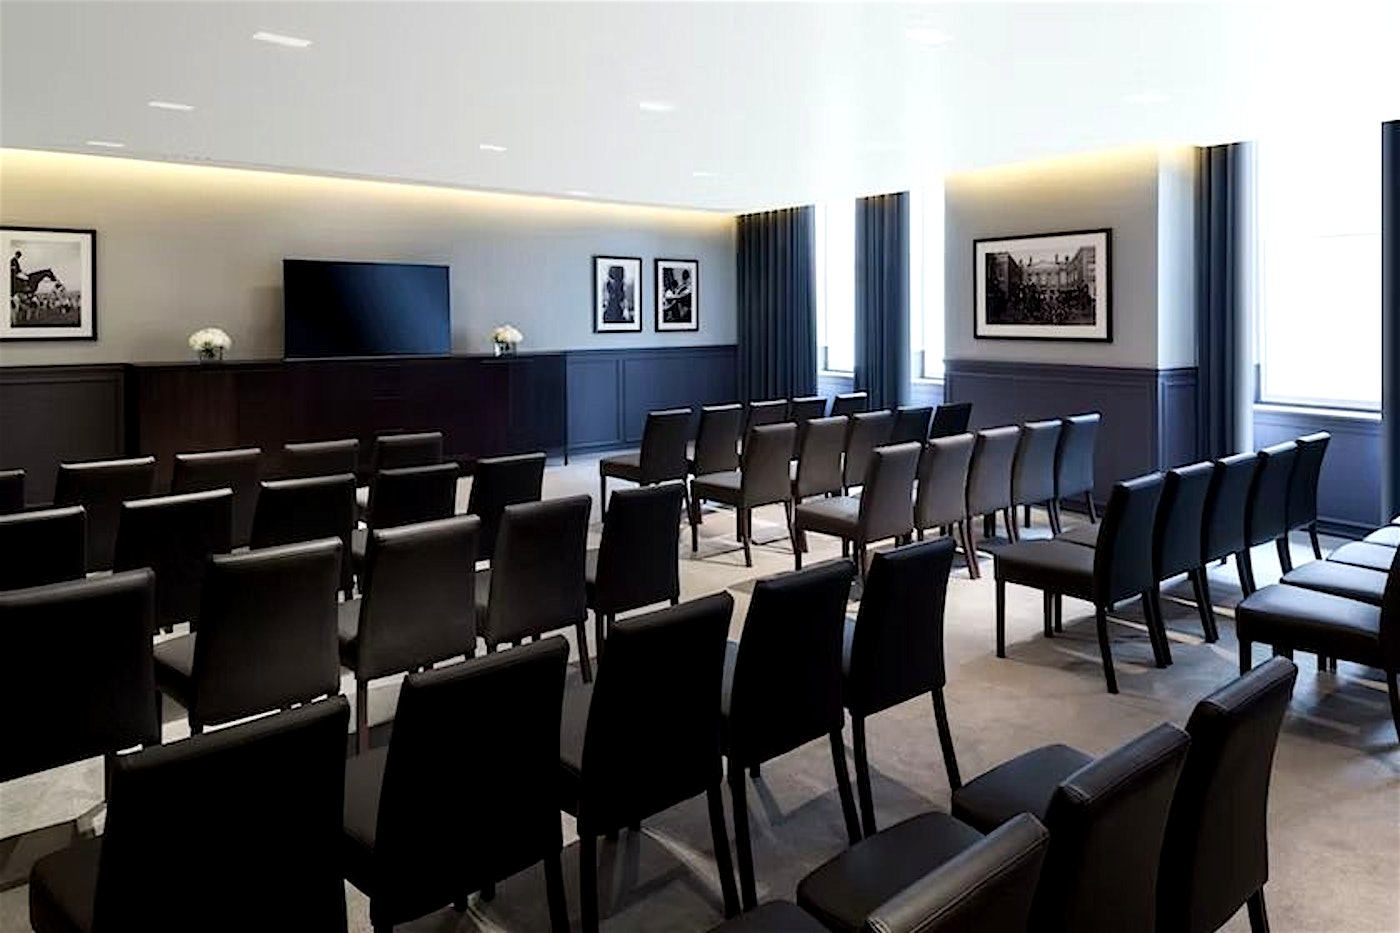 Studio 2, EDITION london conference rooms